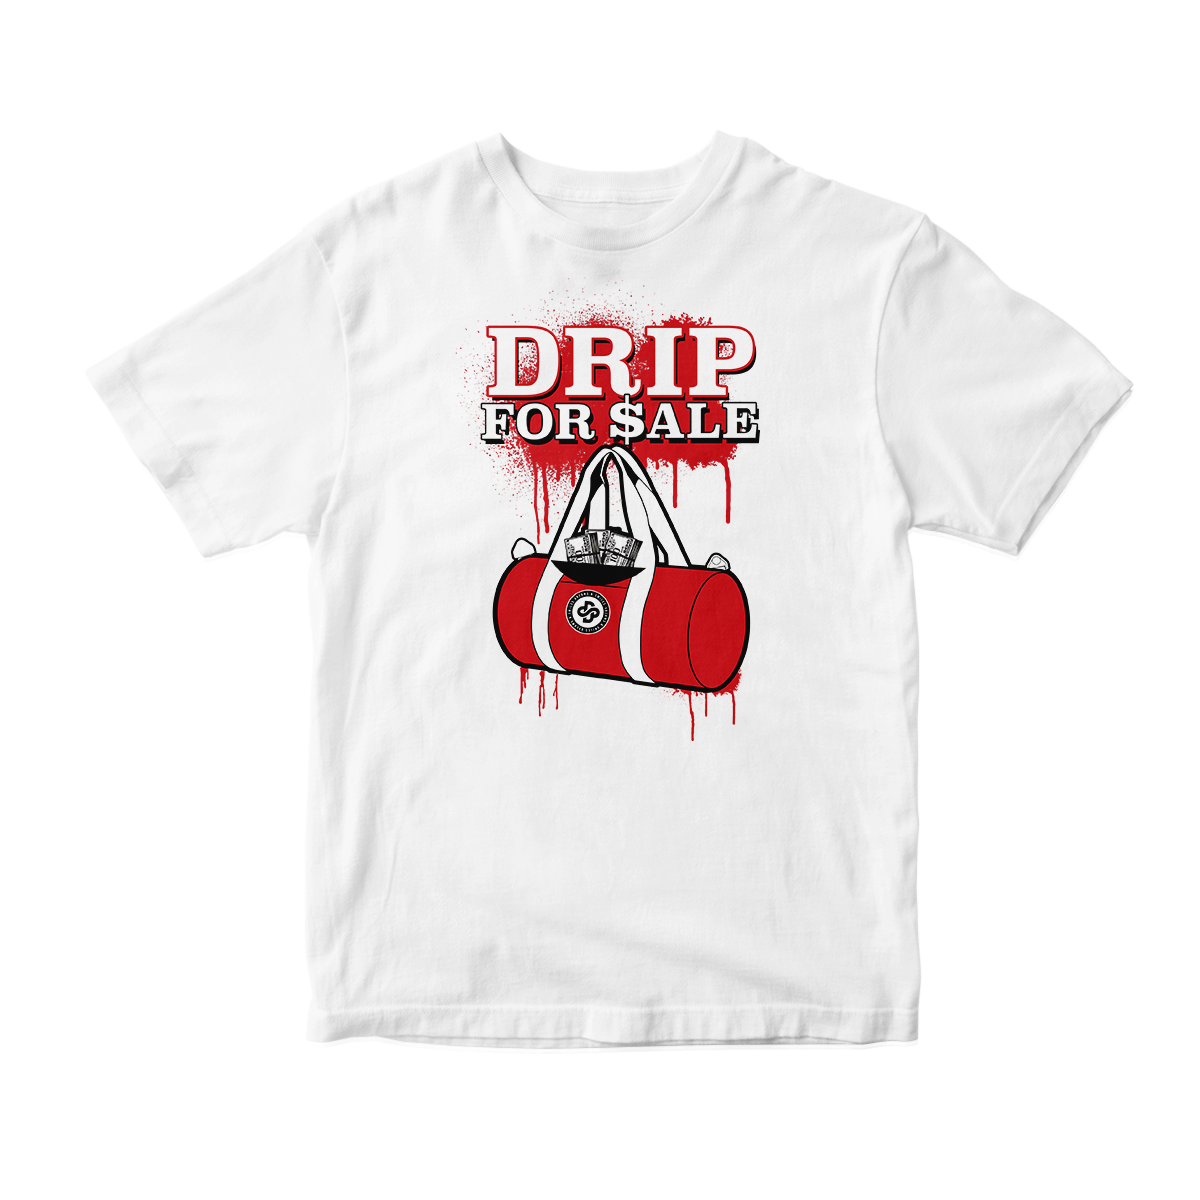 'Drip For Sale' in Gym Red CW Unisex Short Sleeve Tee